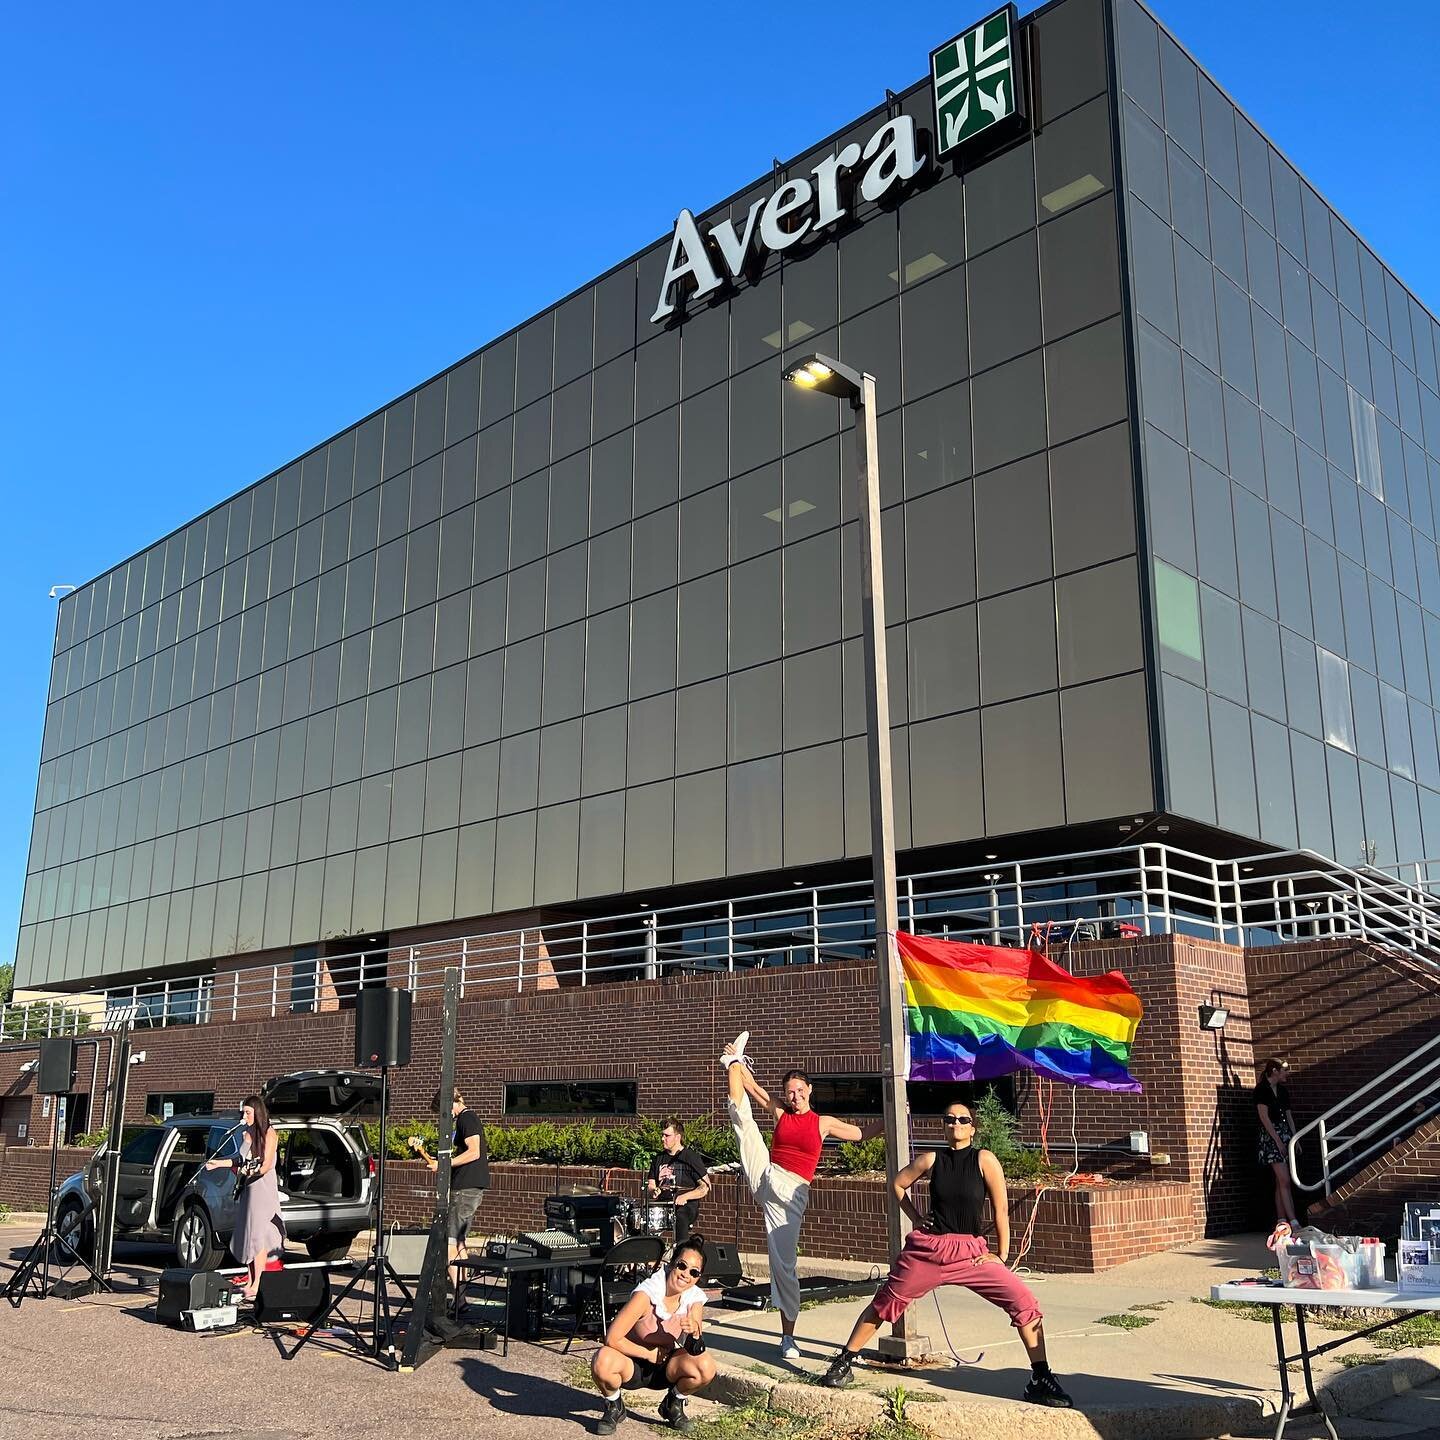 Tonights secret location is&hellip;

The gold Avera building off of 10th street in Downtown Sioux Falls. This is the same parking lot as the Great outdoor store. The only available entrance to this parking lot is off of 1st Ave!

Keep an eye out for 